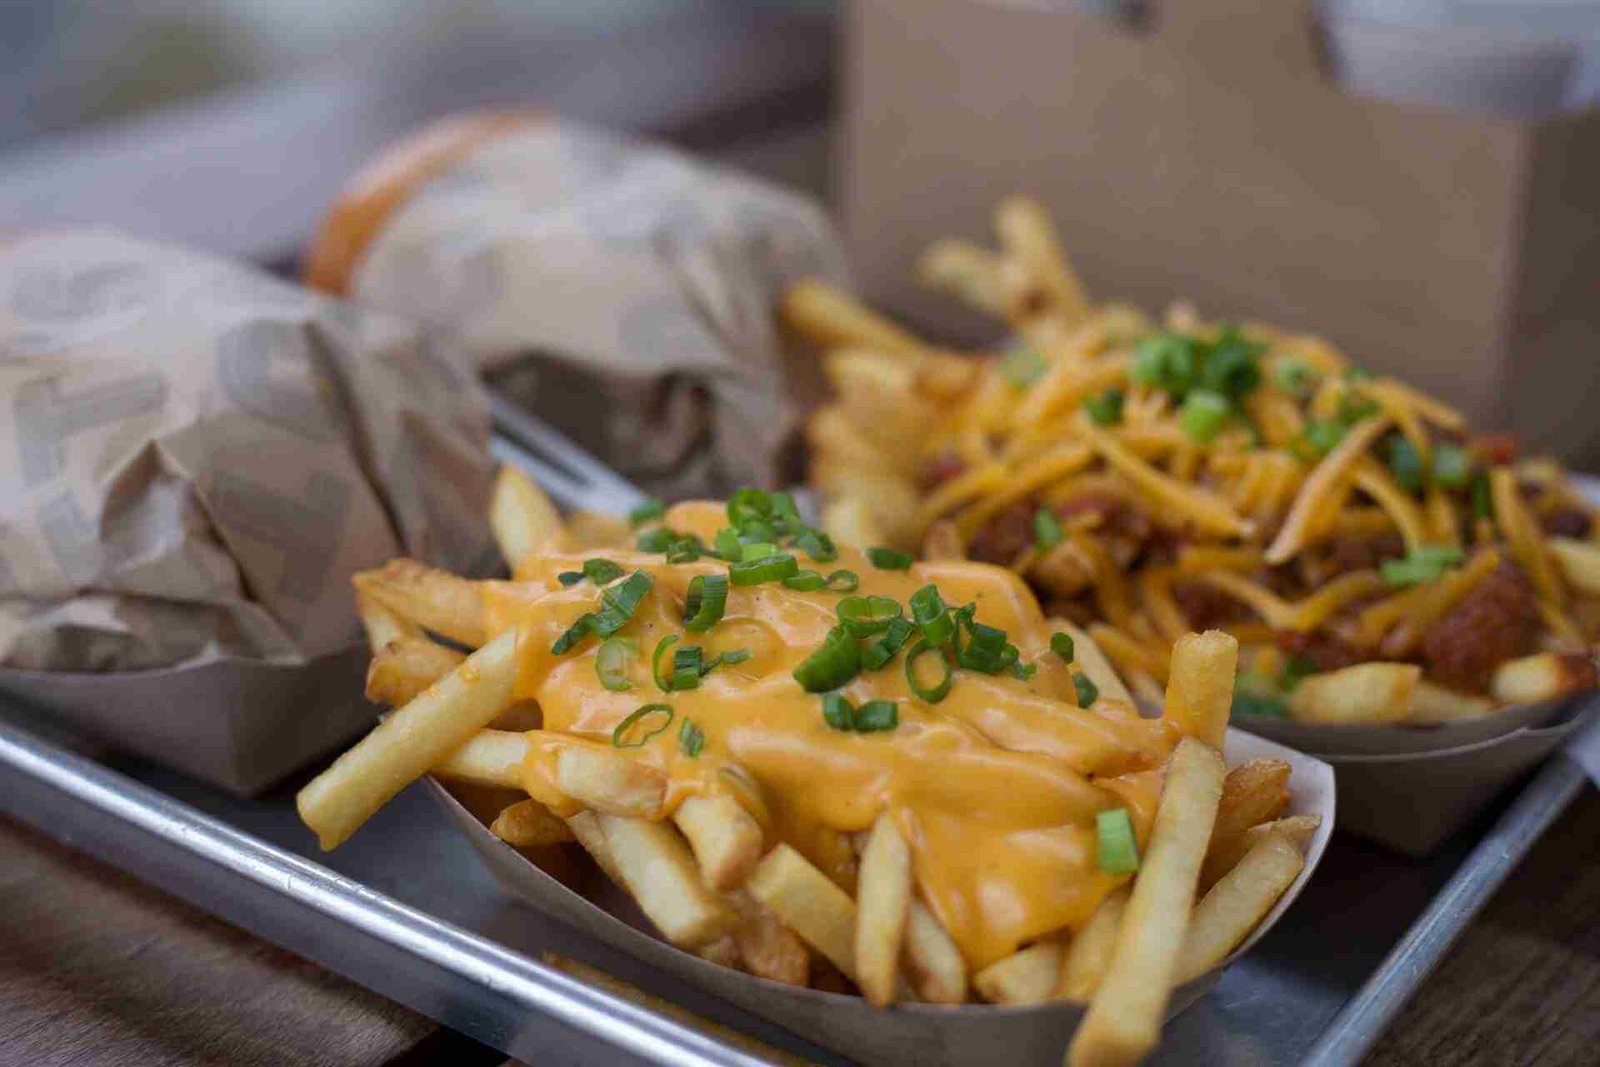 Is chili cheese fries